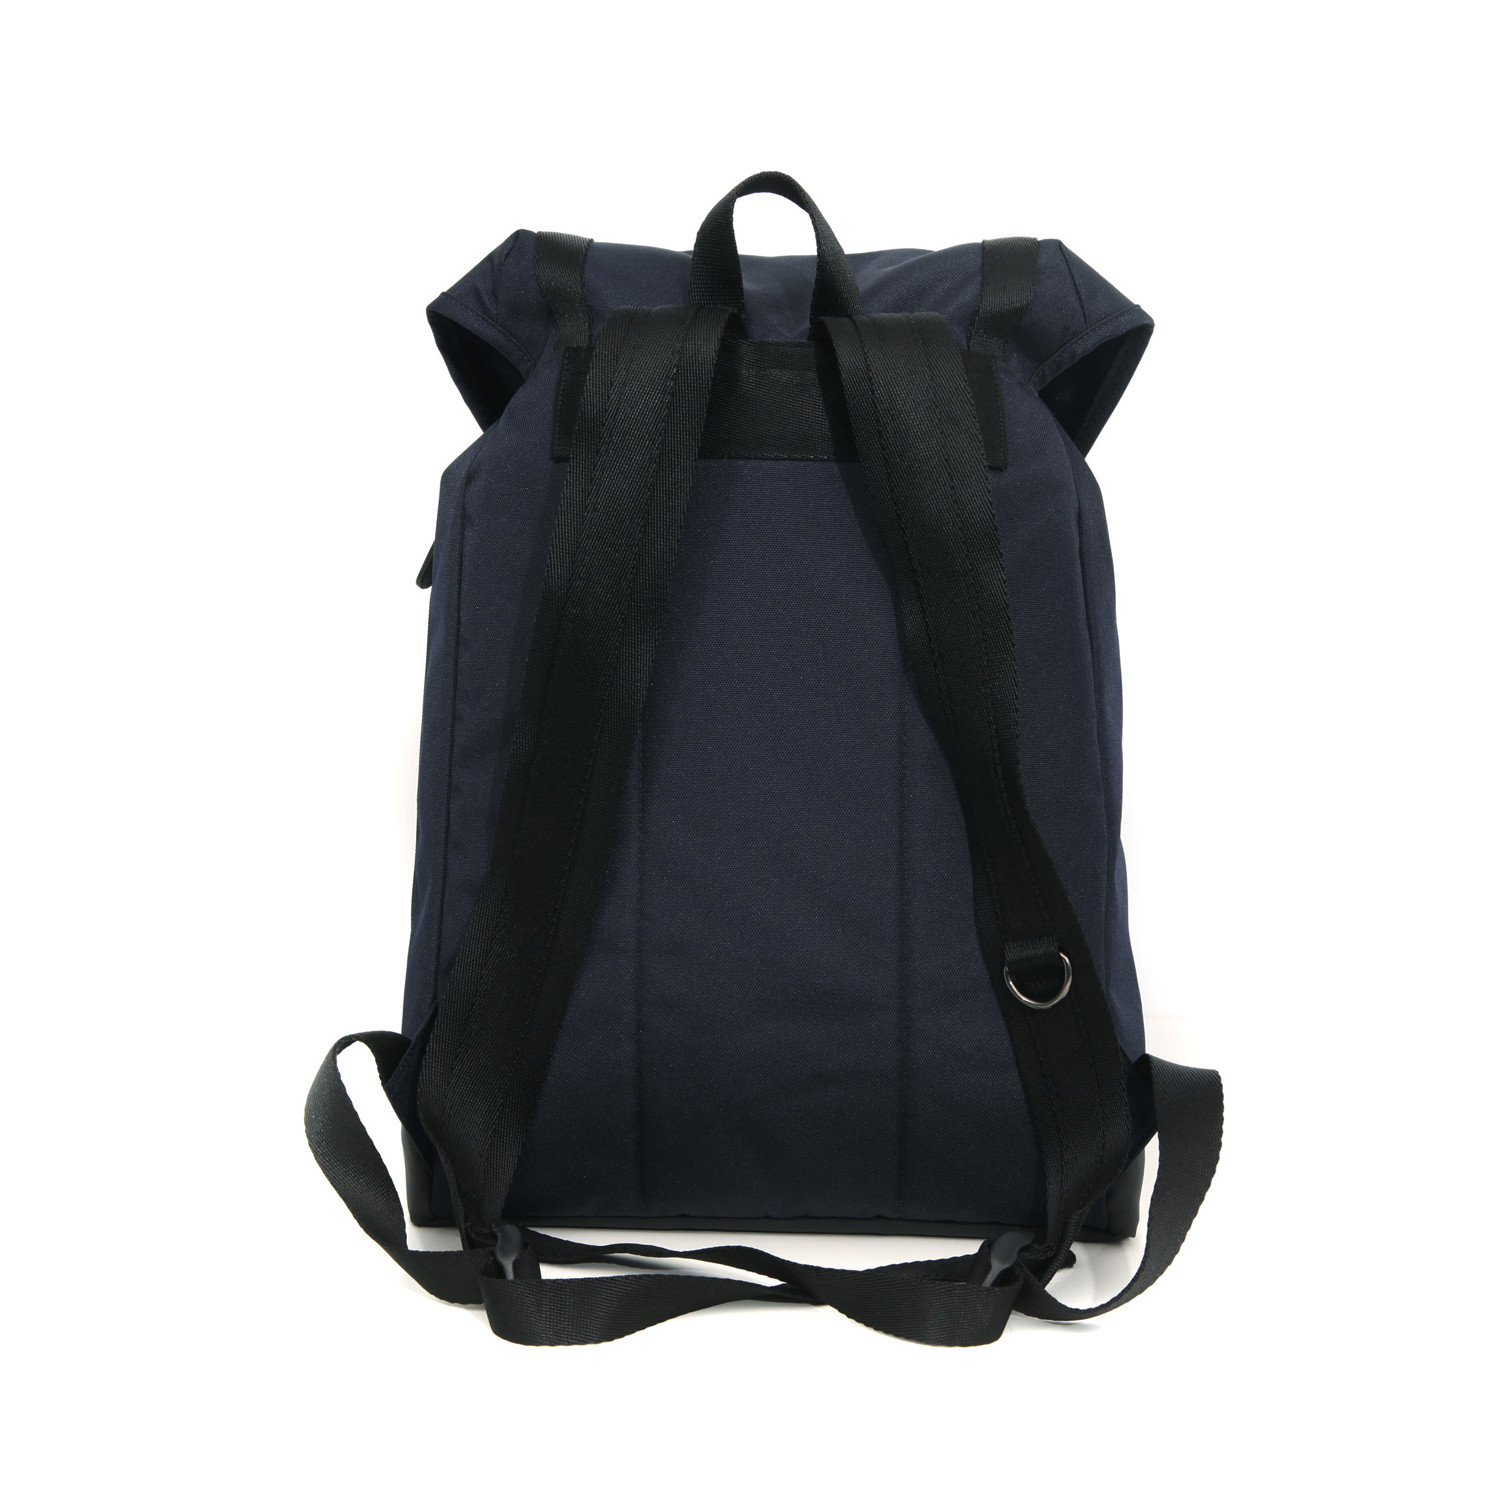 Lancaster Backpack (Black) - National Publicity - Touch of Modern